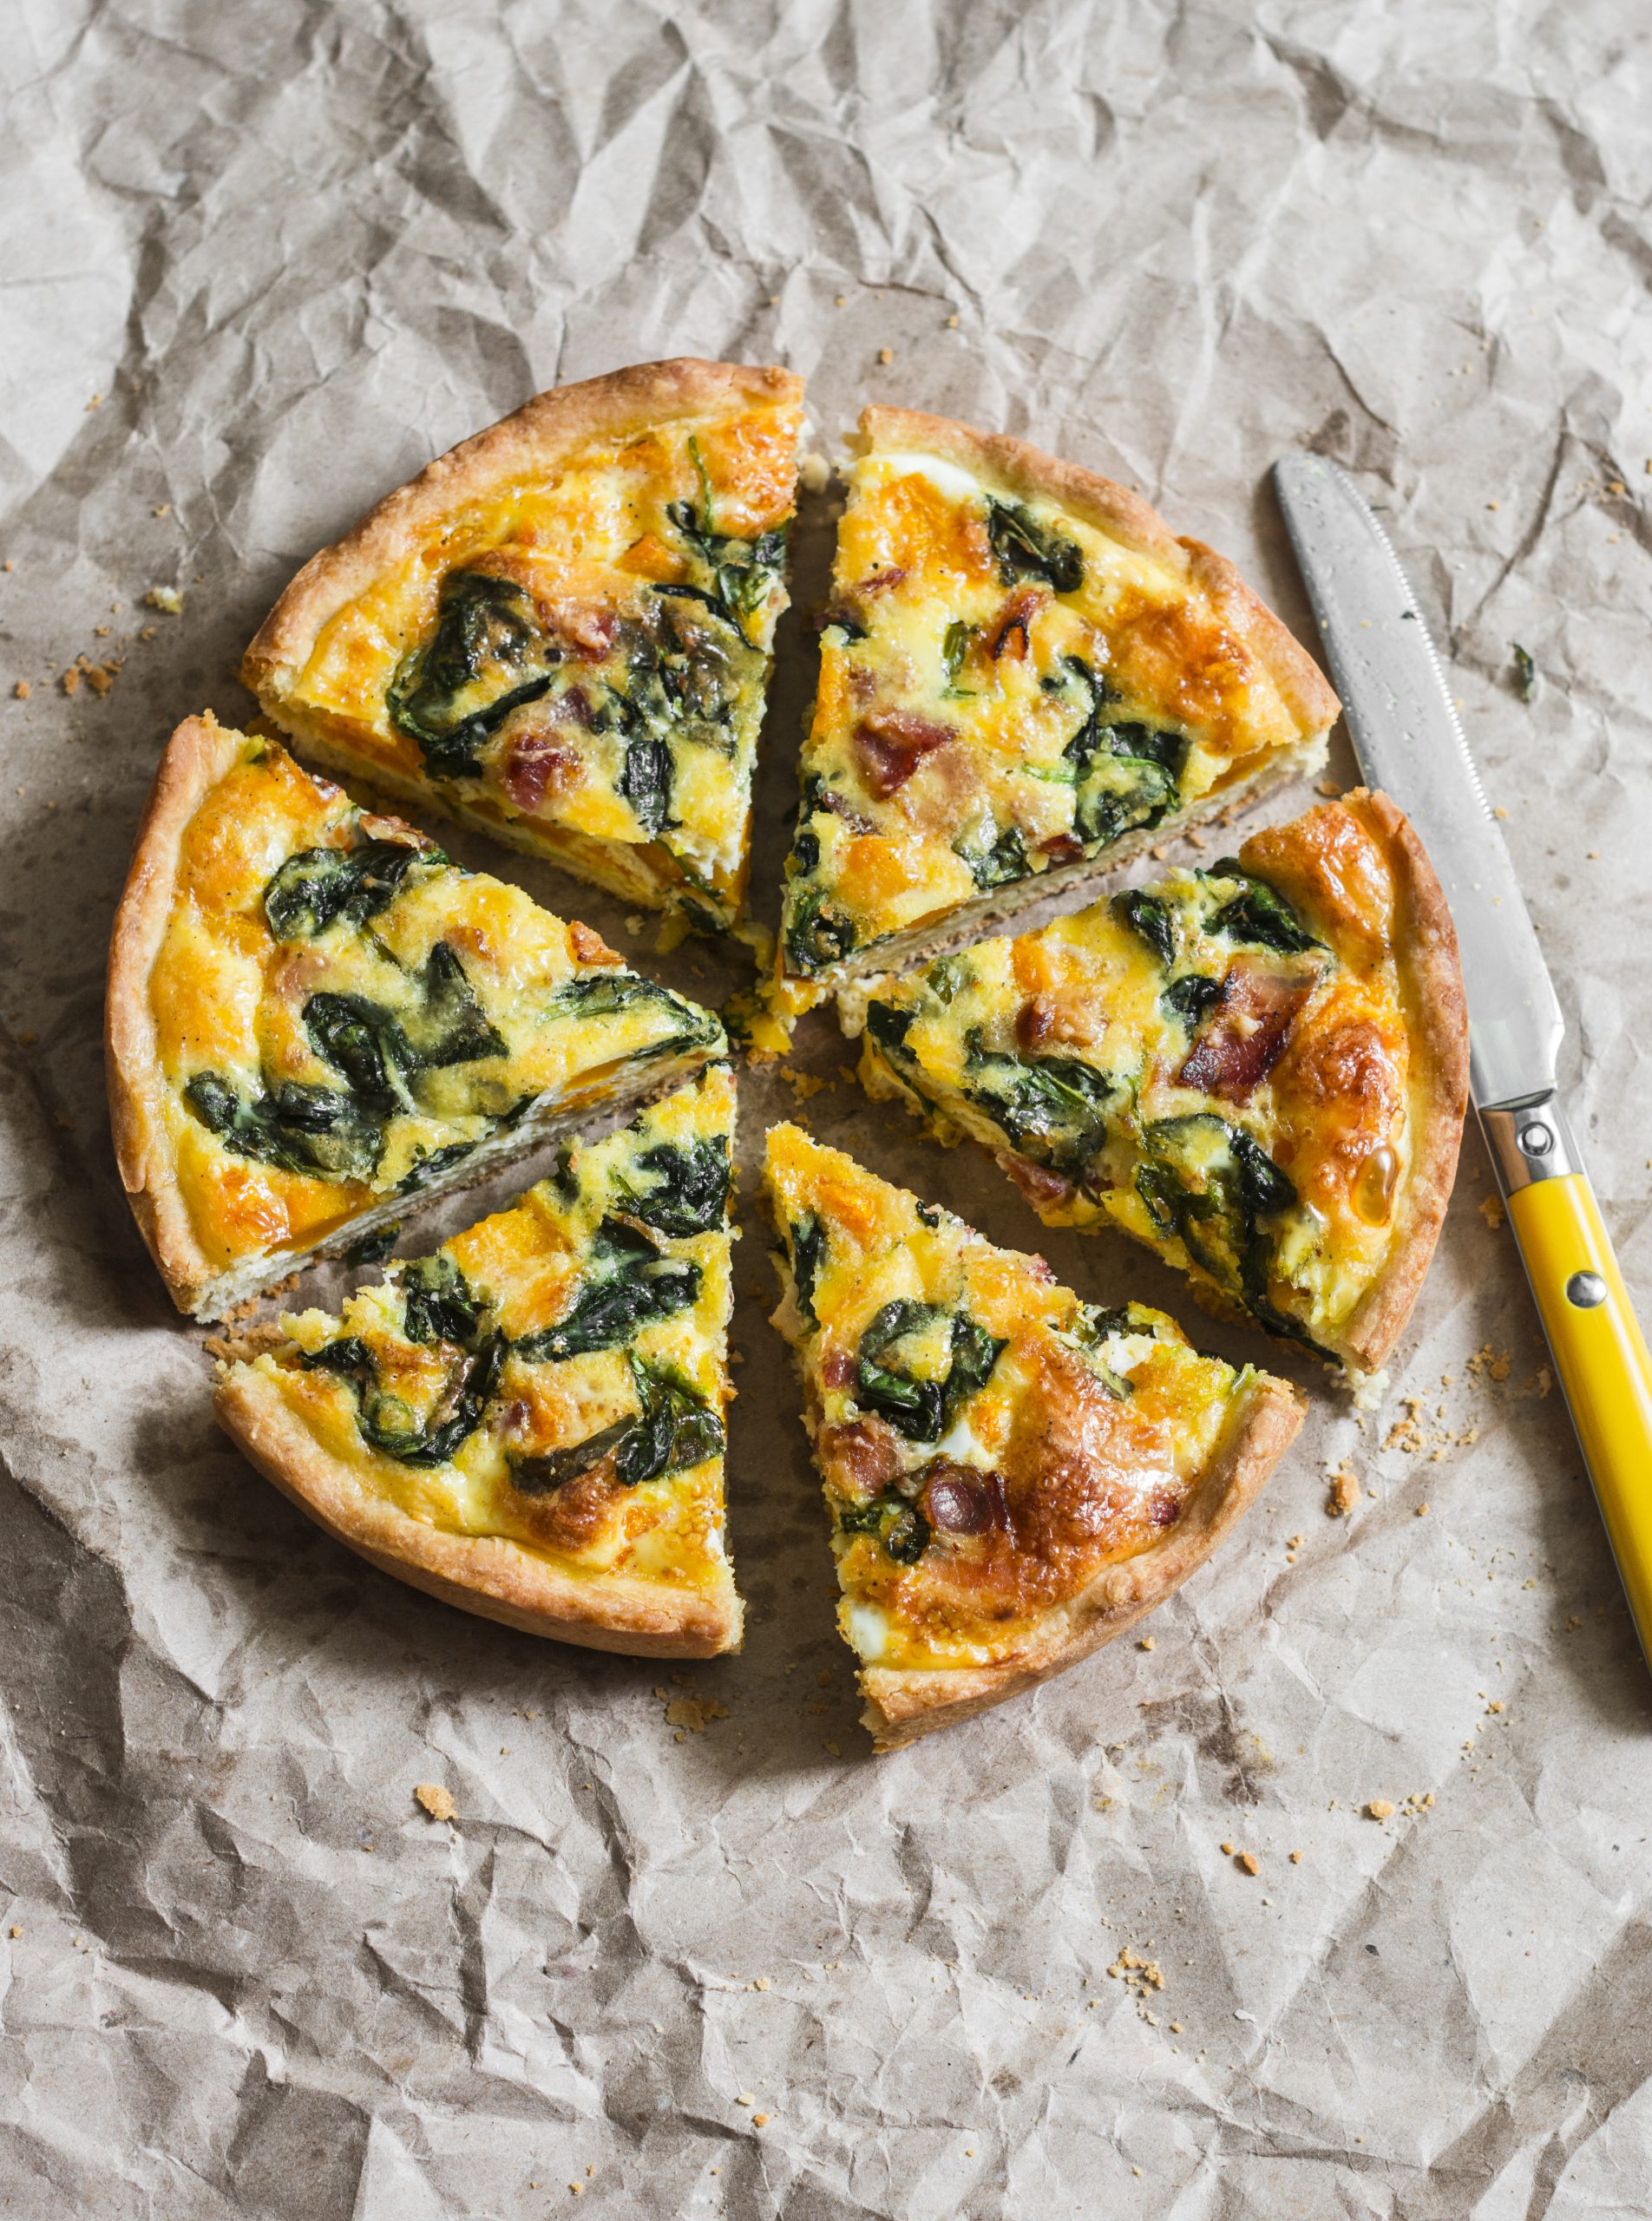 Vegetable and turkey quiche on a paper background.